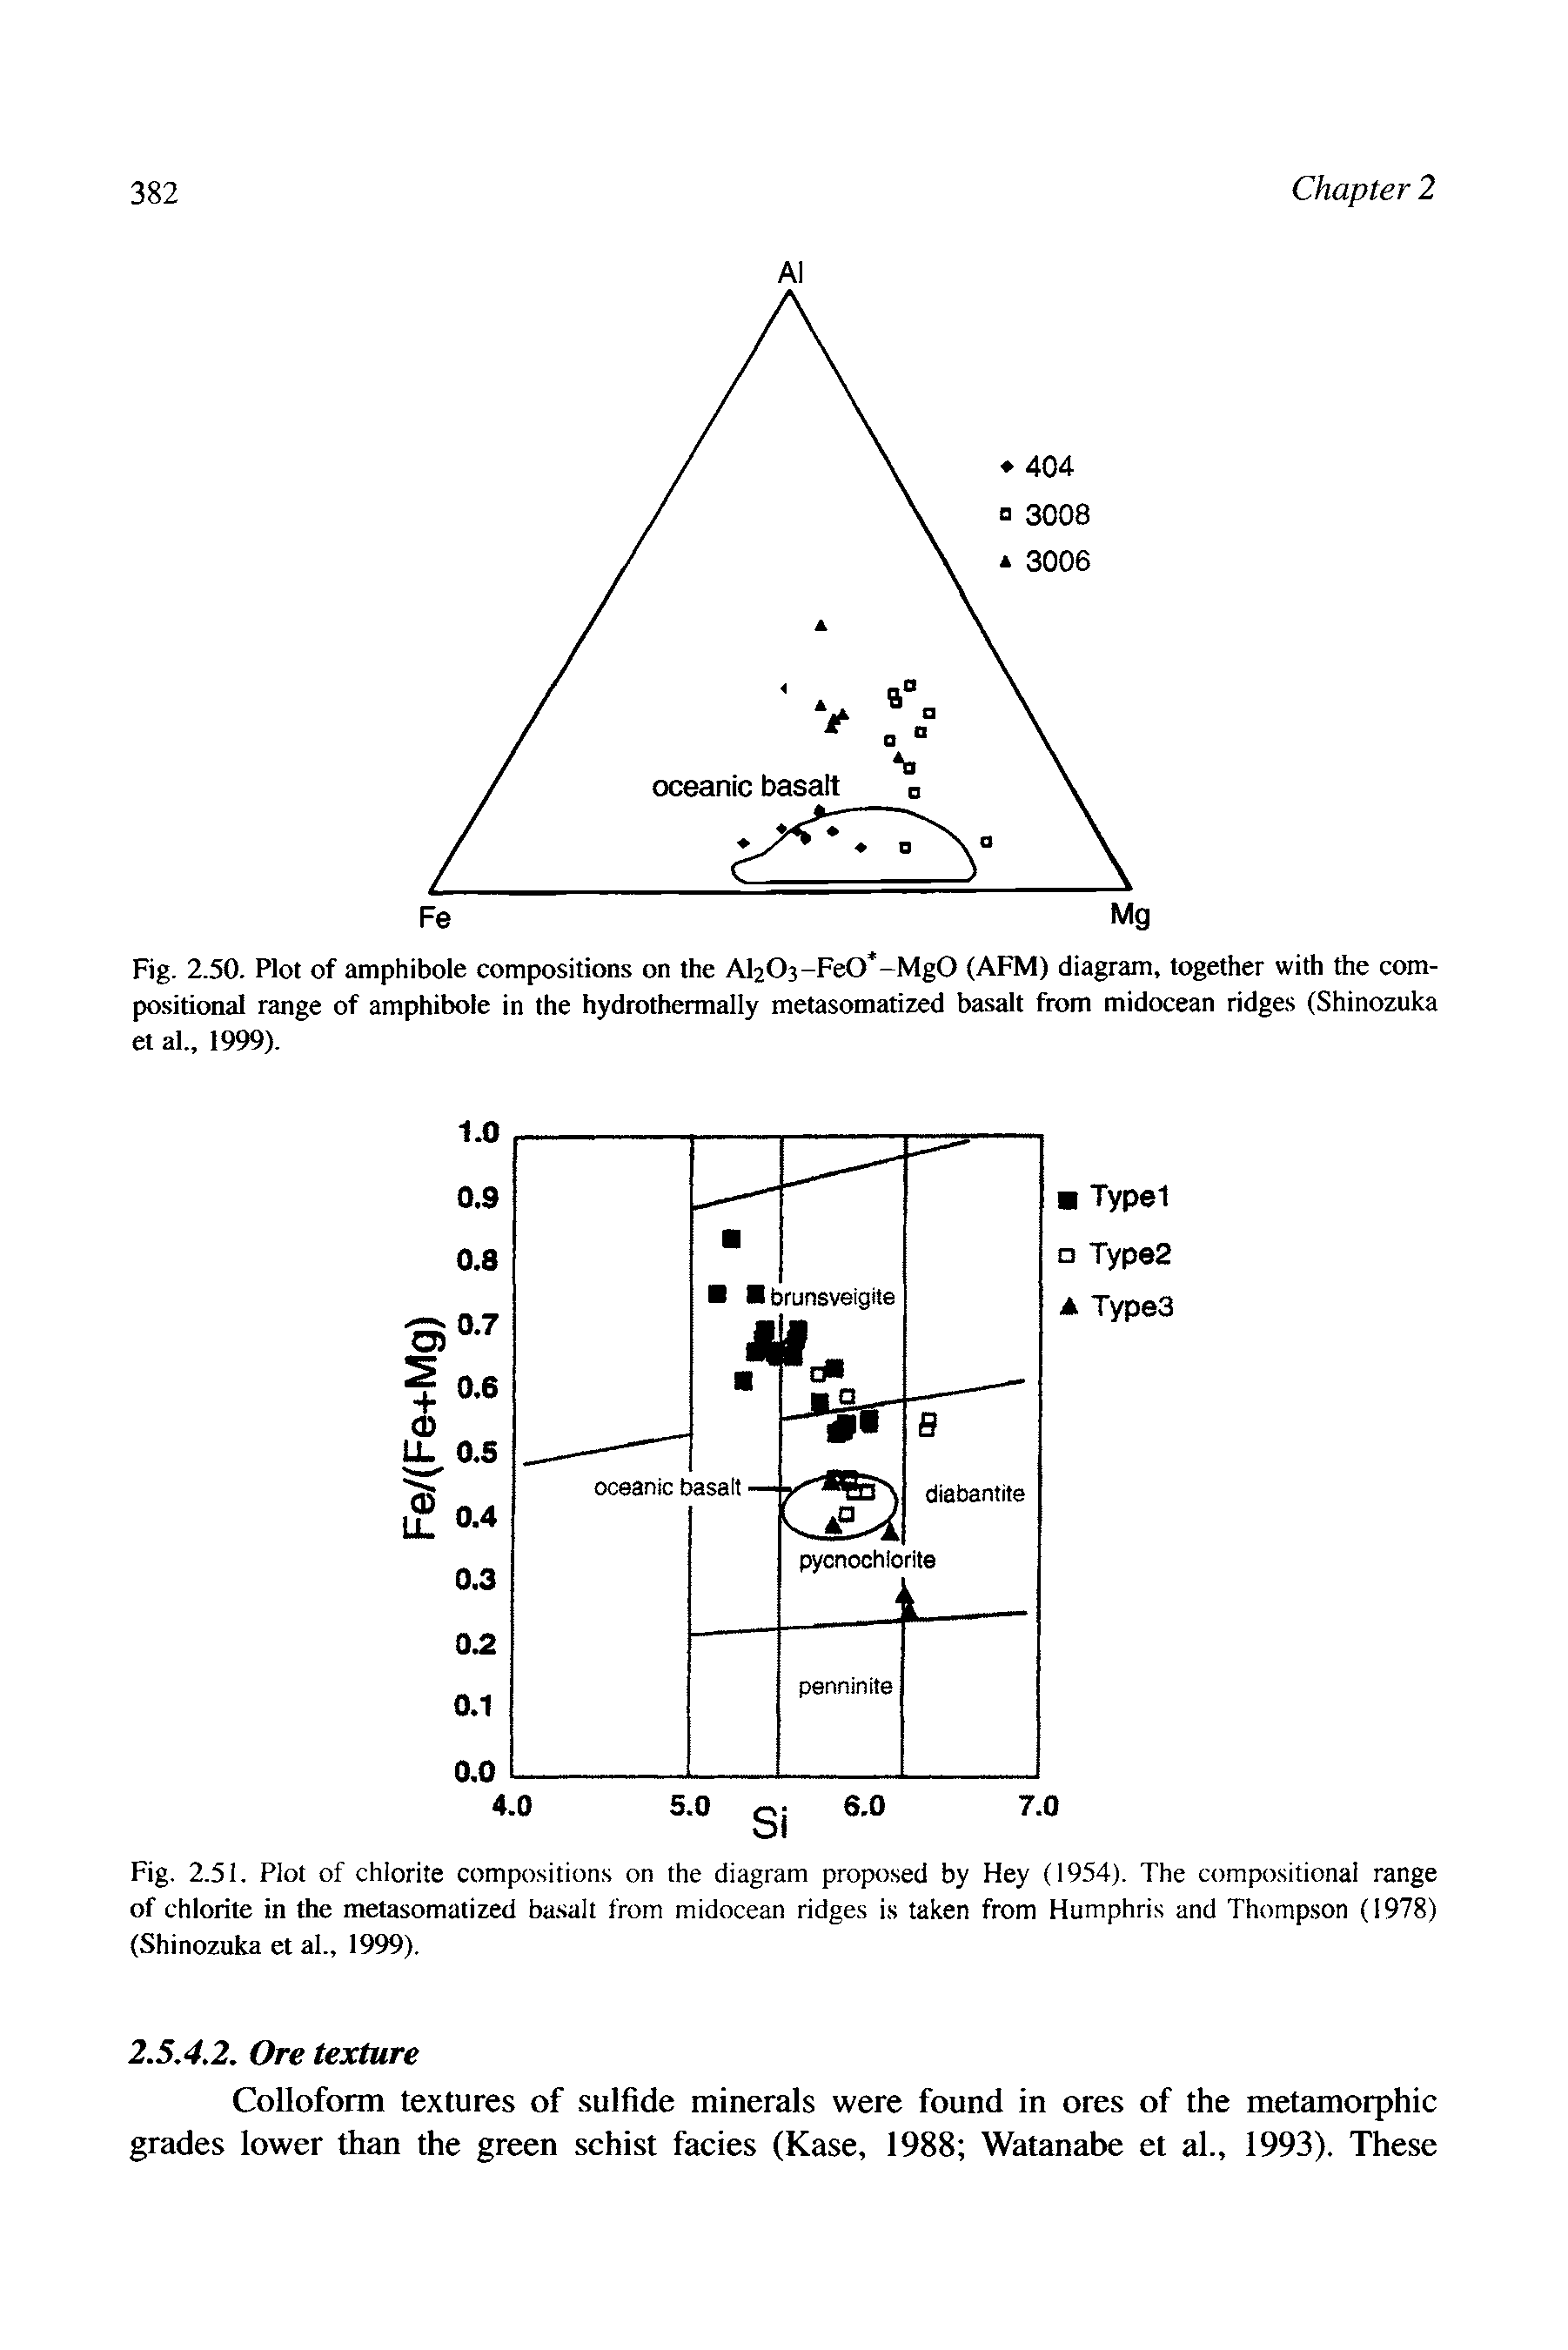 Fig. 2.51. Plot of chlorite compositions on the diagram proposed by Hey (1954). The compositional range of chlorite in the metasomatized ba.salt from midocean ridges is taken from Humphris and Thompson (1978) (Shinozuka et al., 1999).